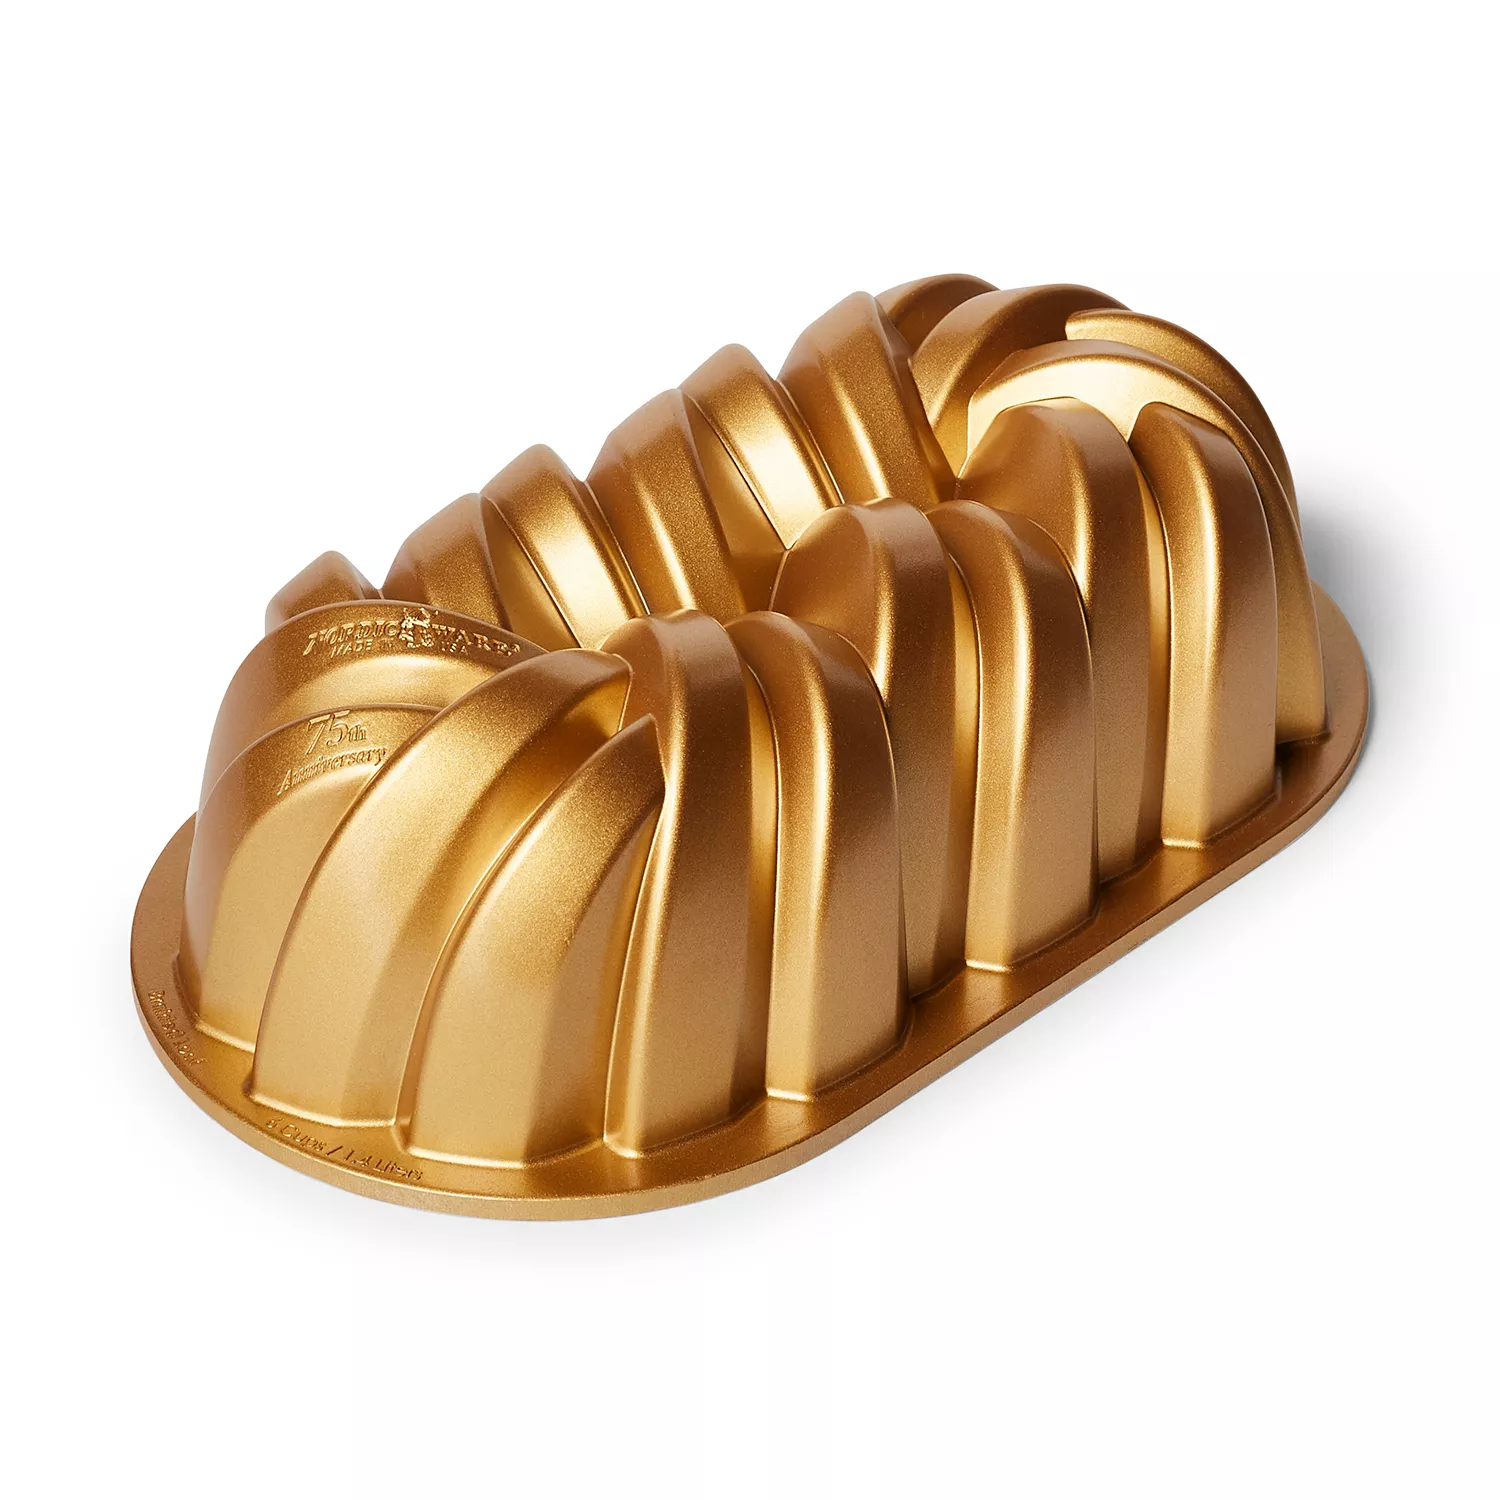 Classic Fluted Loaf Pan, Nordic Ware